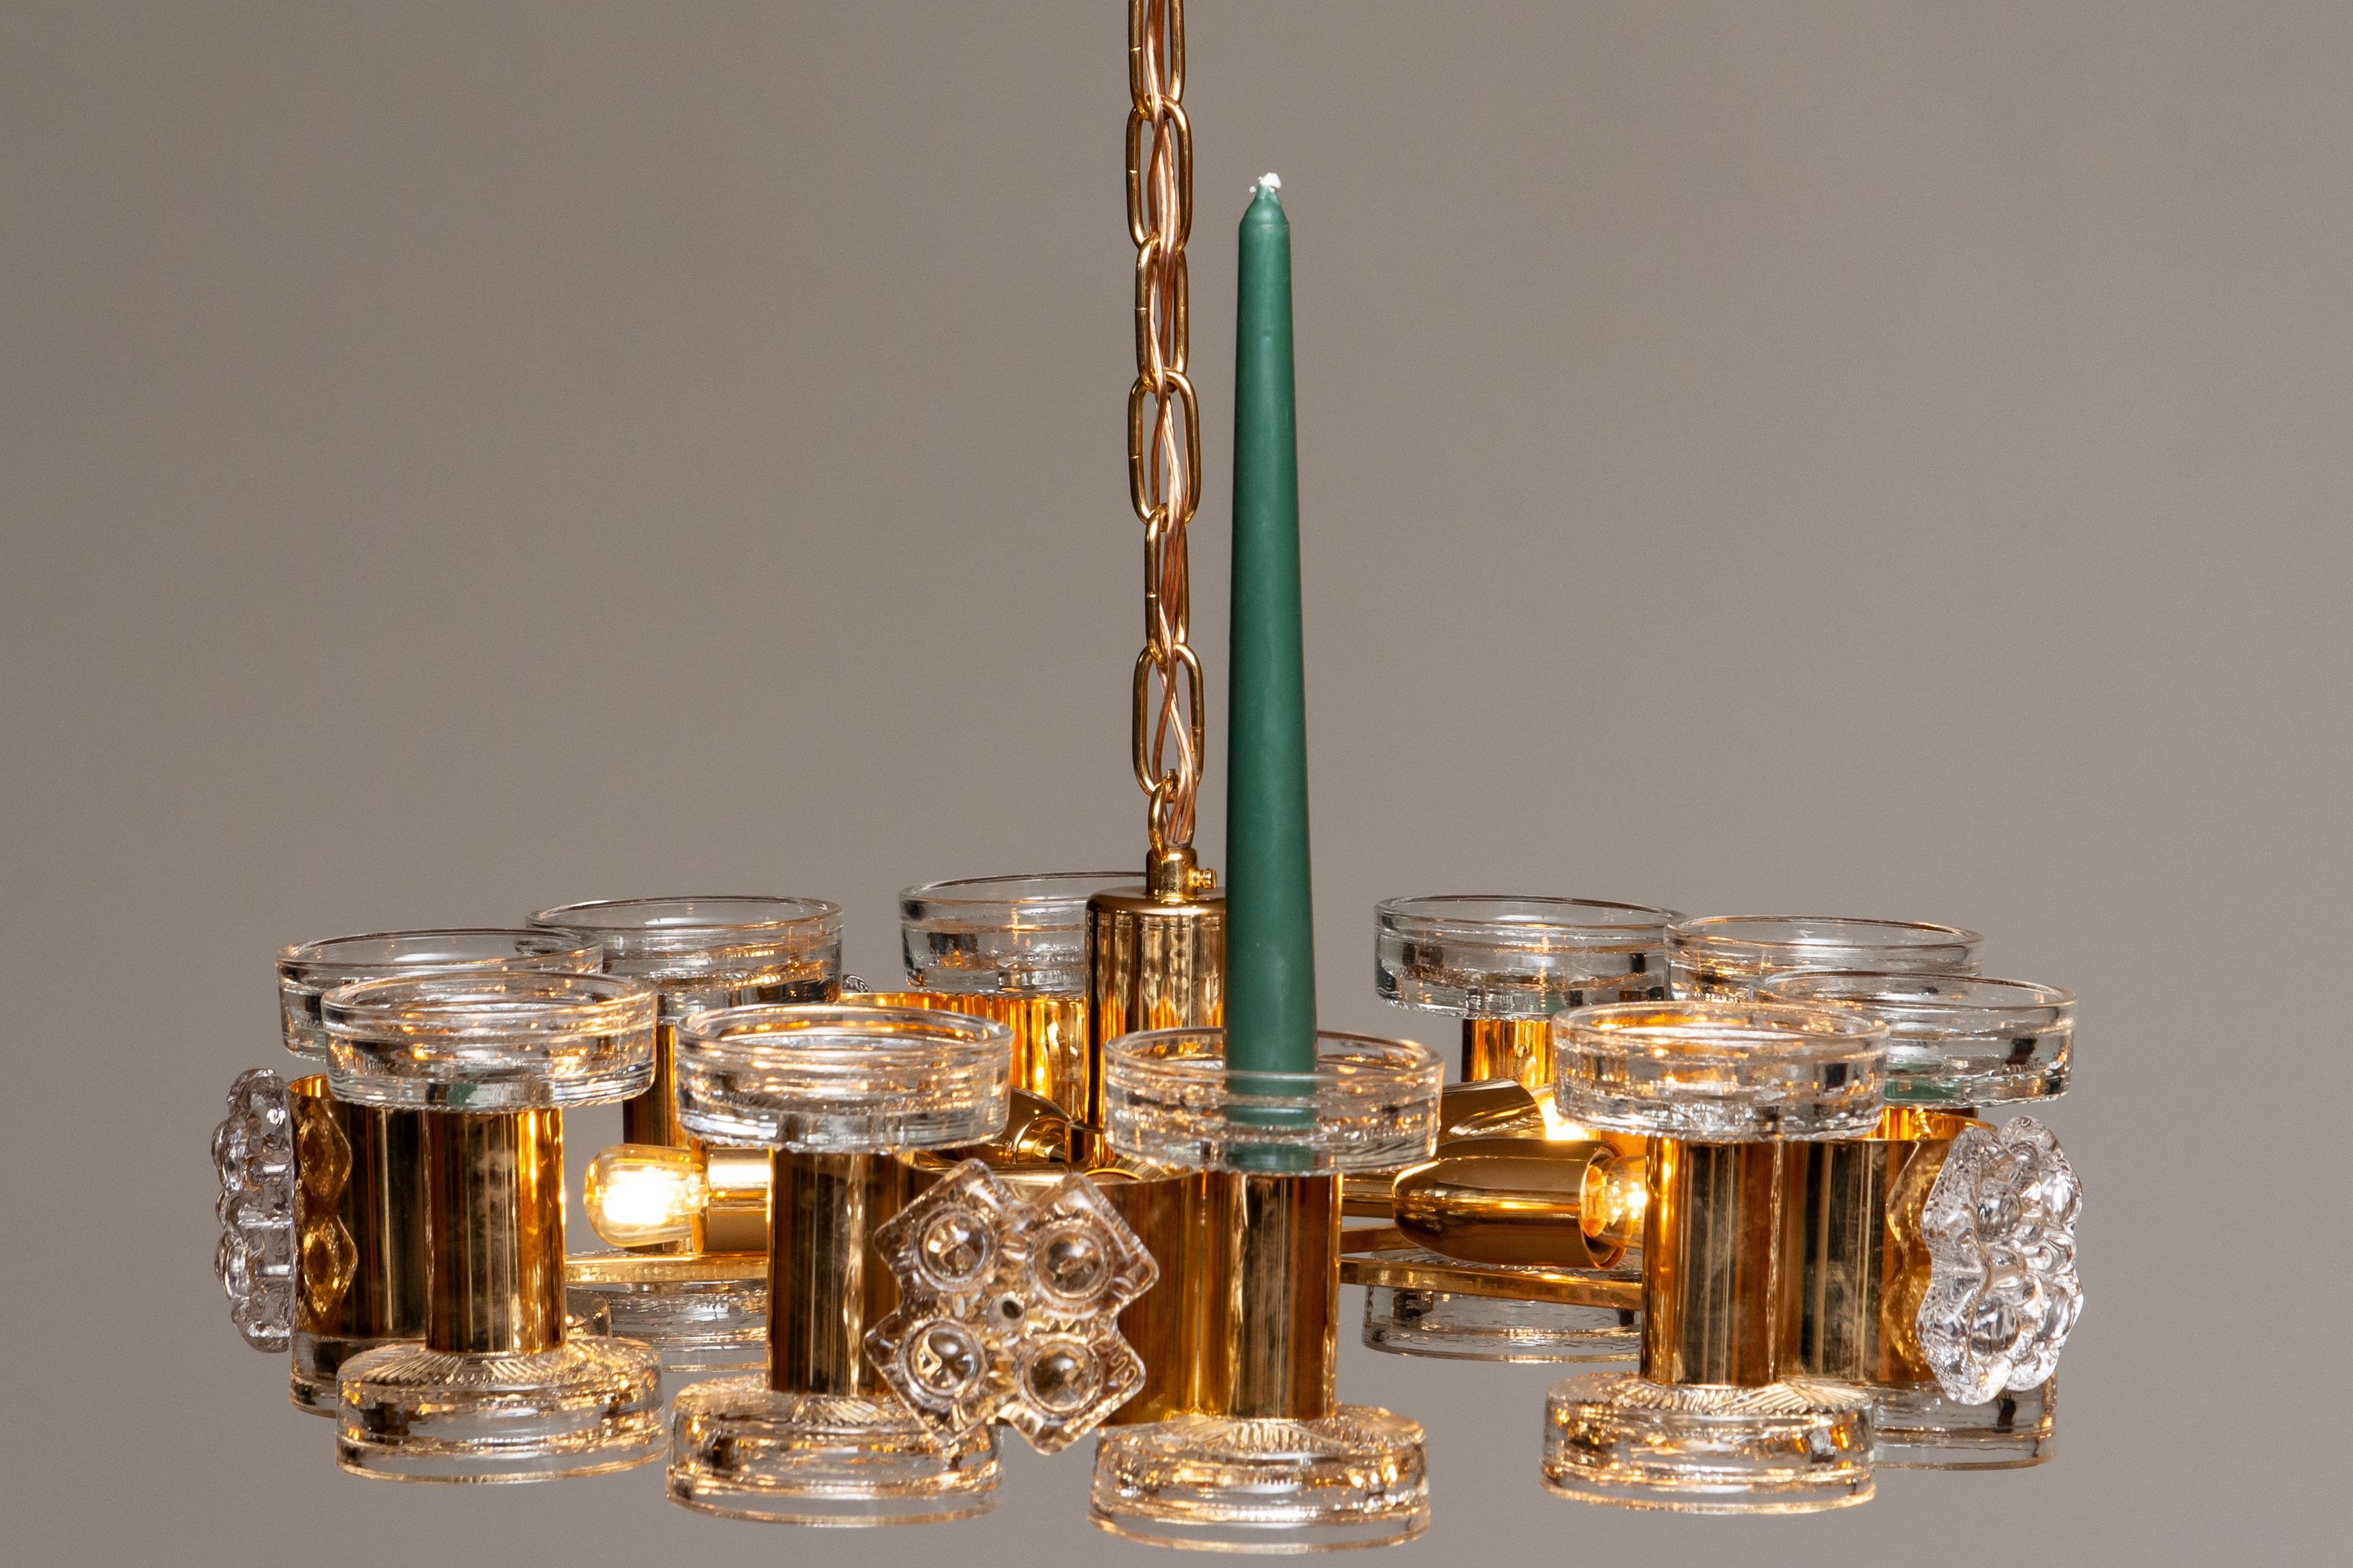 1970s Gilt Chandelier with Ten Candle Holders and Five Screw Bulbs by Orrefors In Good Condition For Sale In Silvolde, Gelderland